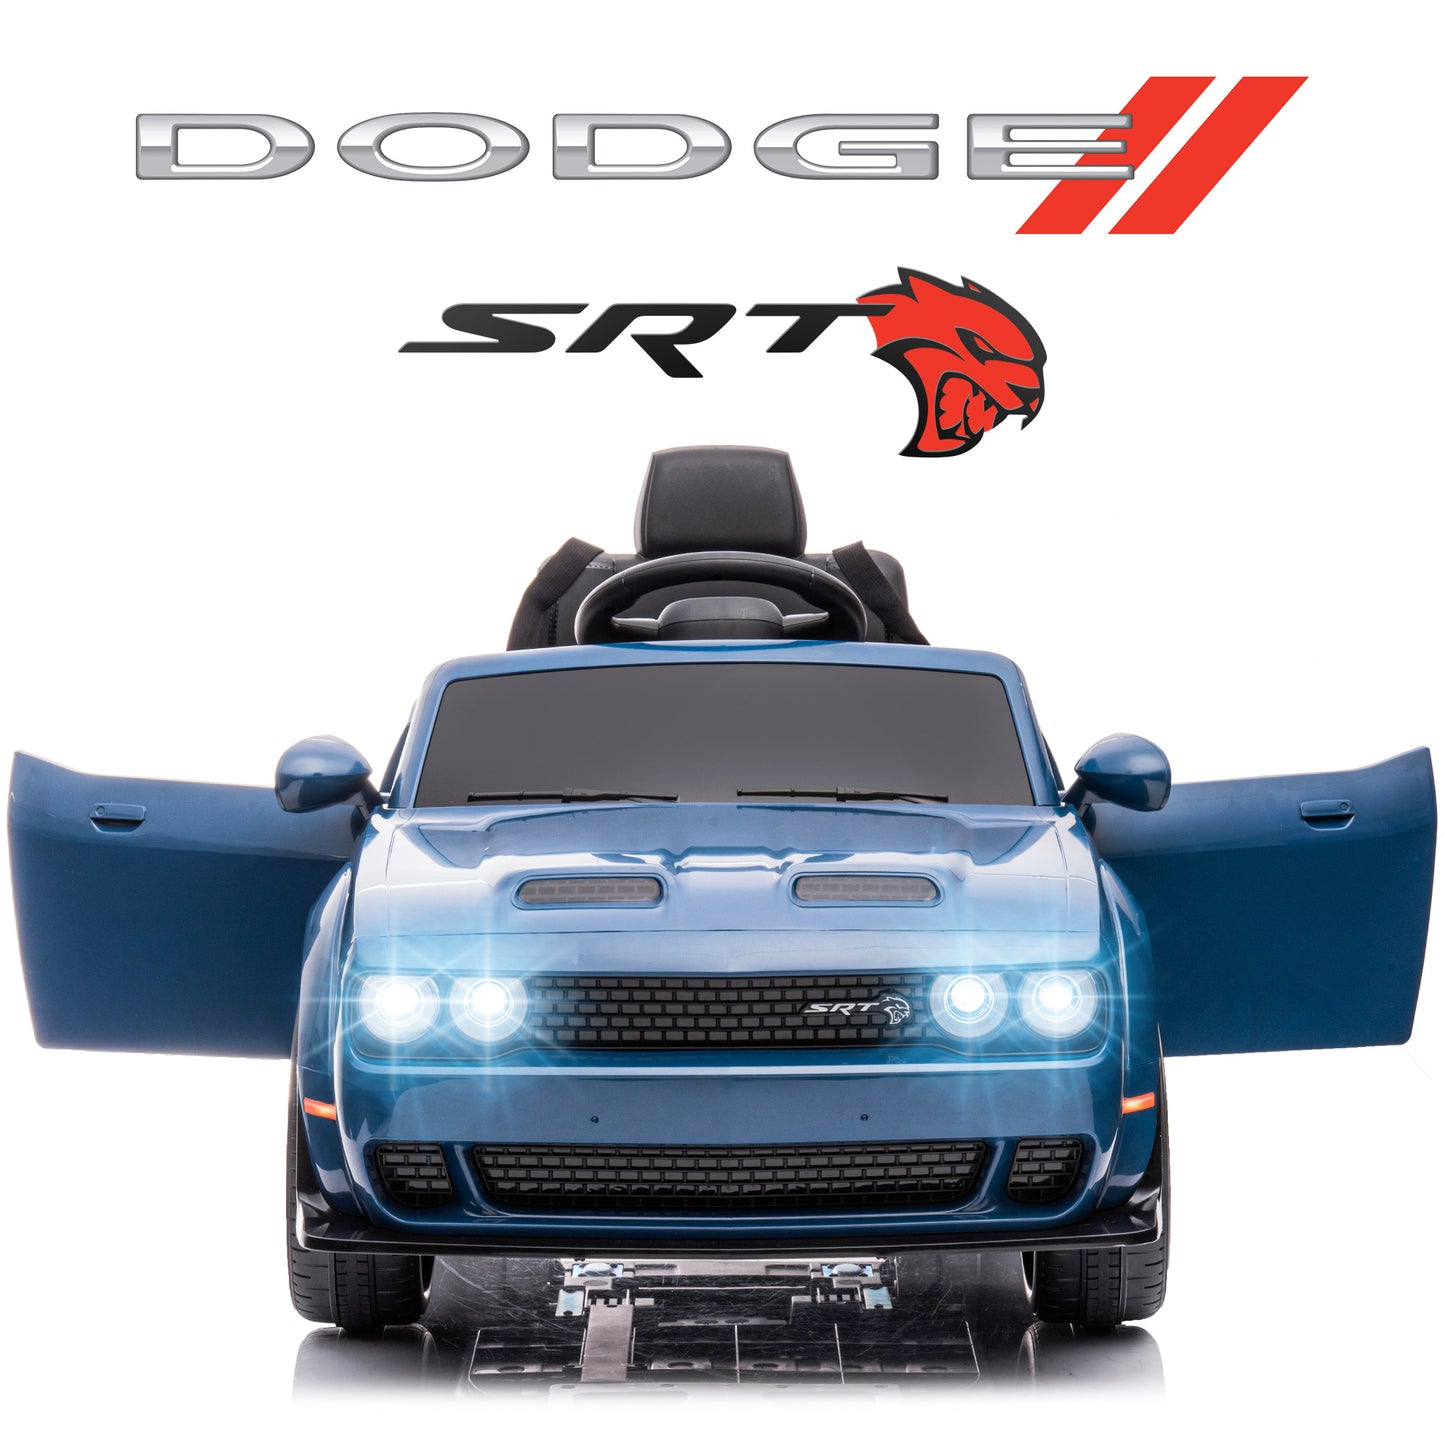 paproos Blue 12V Dodge Challenger Powered Ride On Car with Remote Control